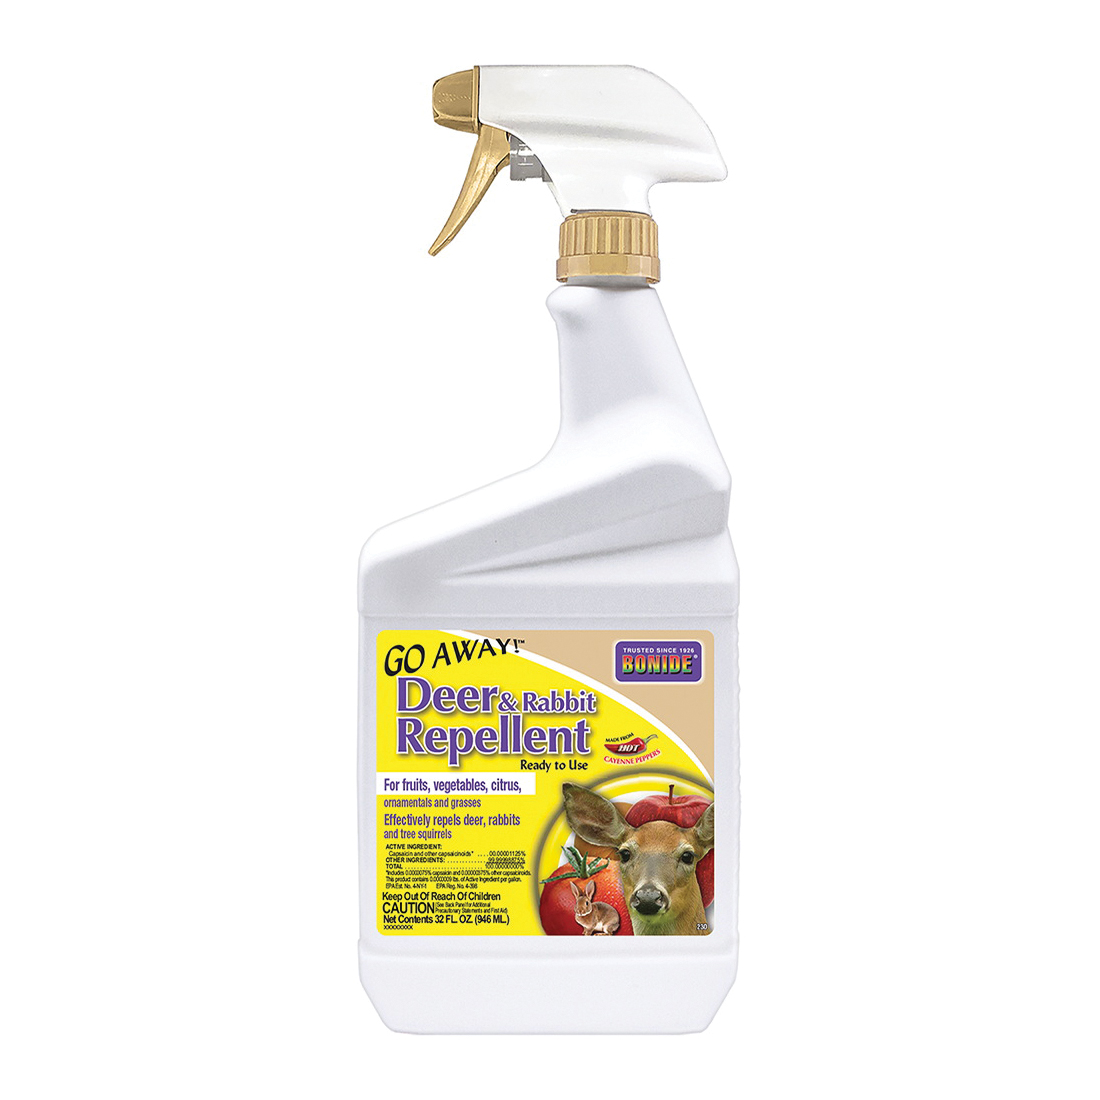 230 Deer and Rabbit Repellent, Ready-to-Use